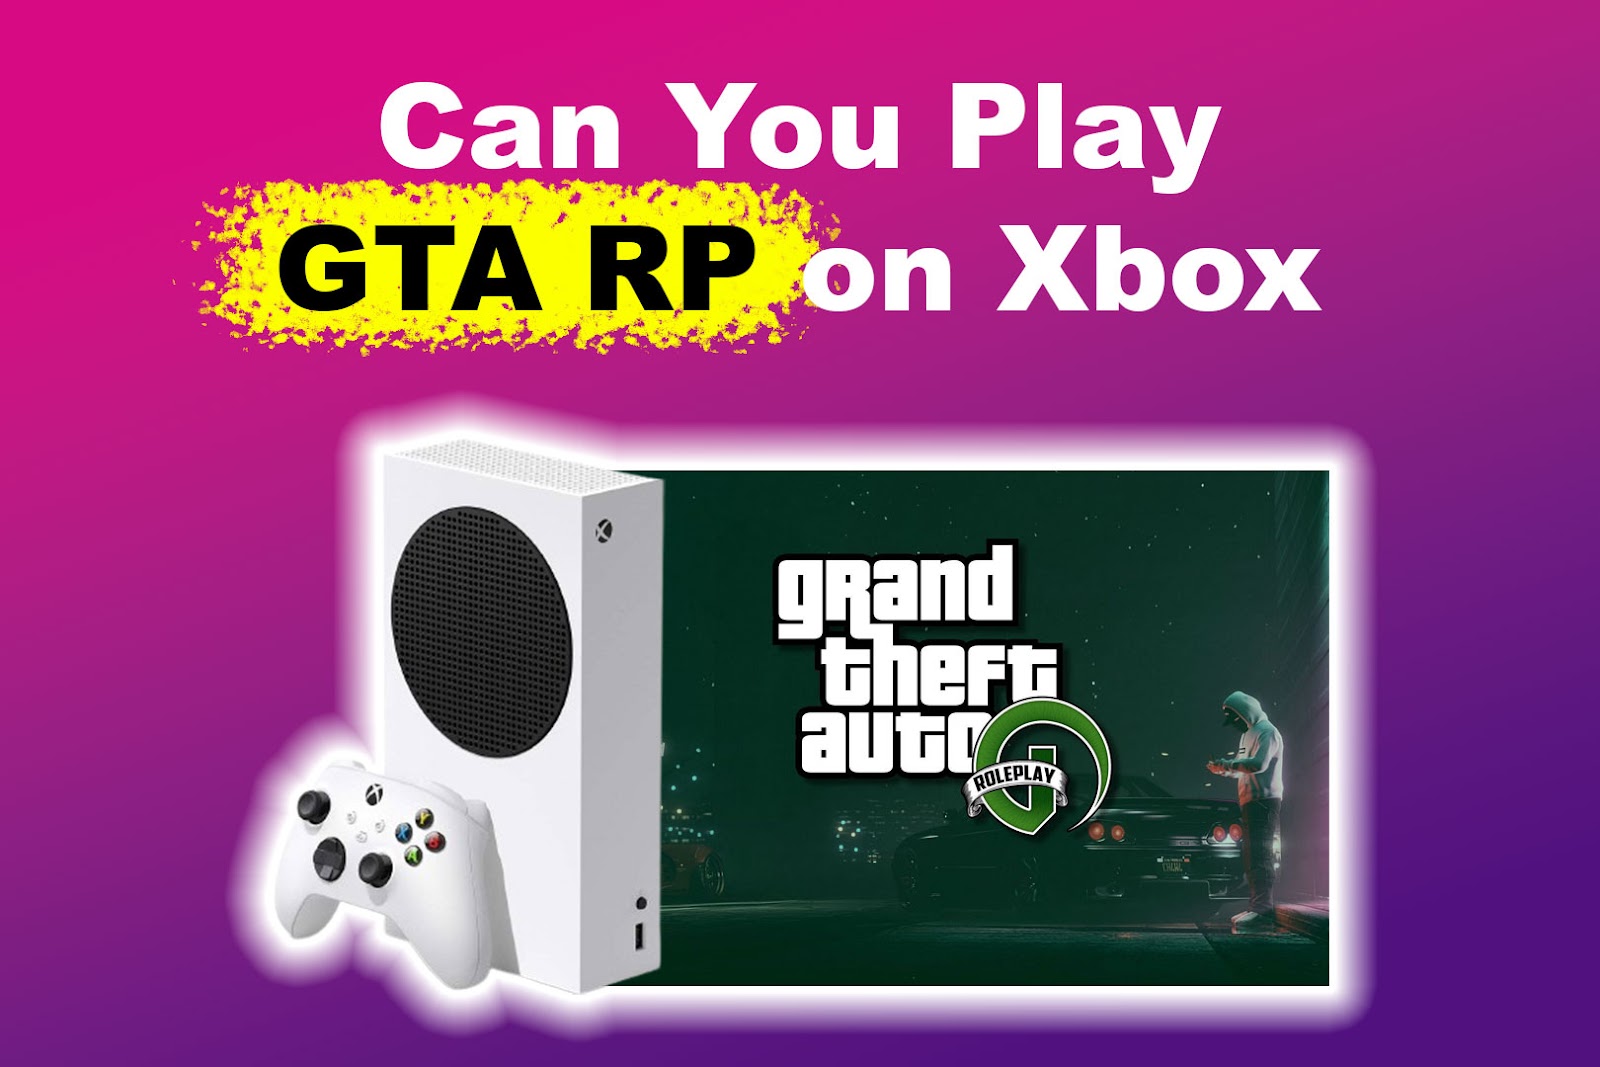 Can You Play GTA RP on Xbox